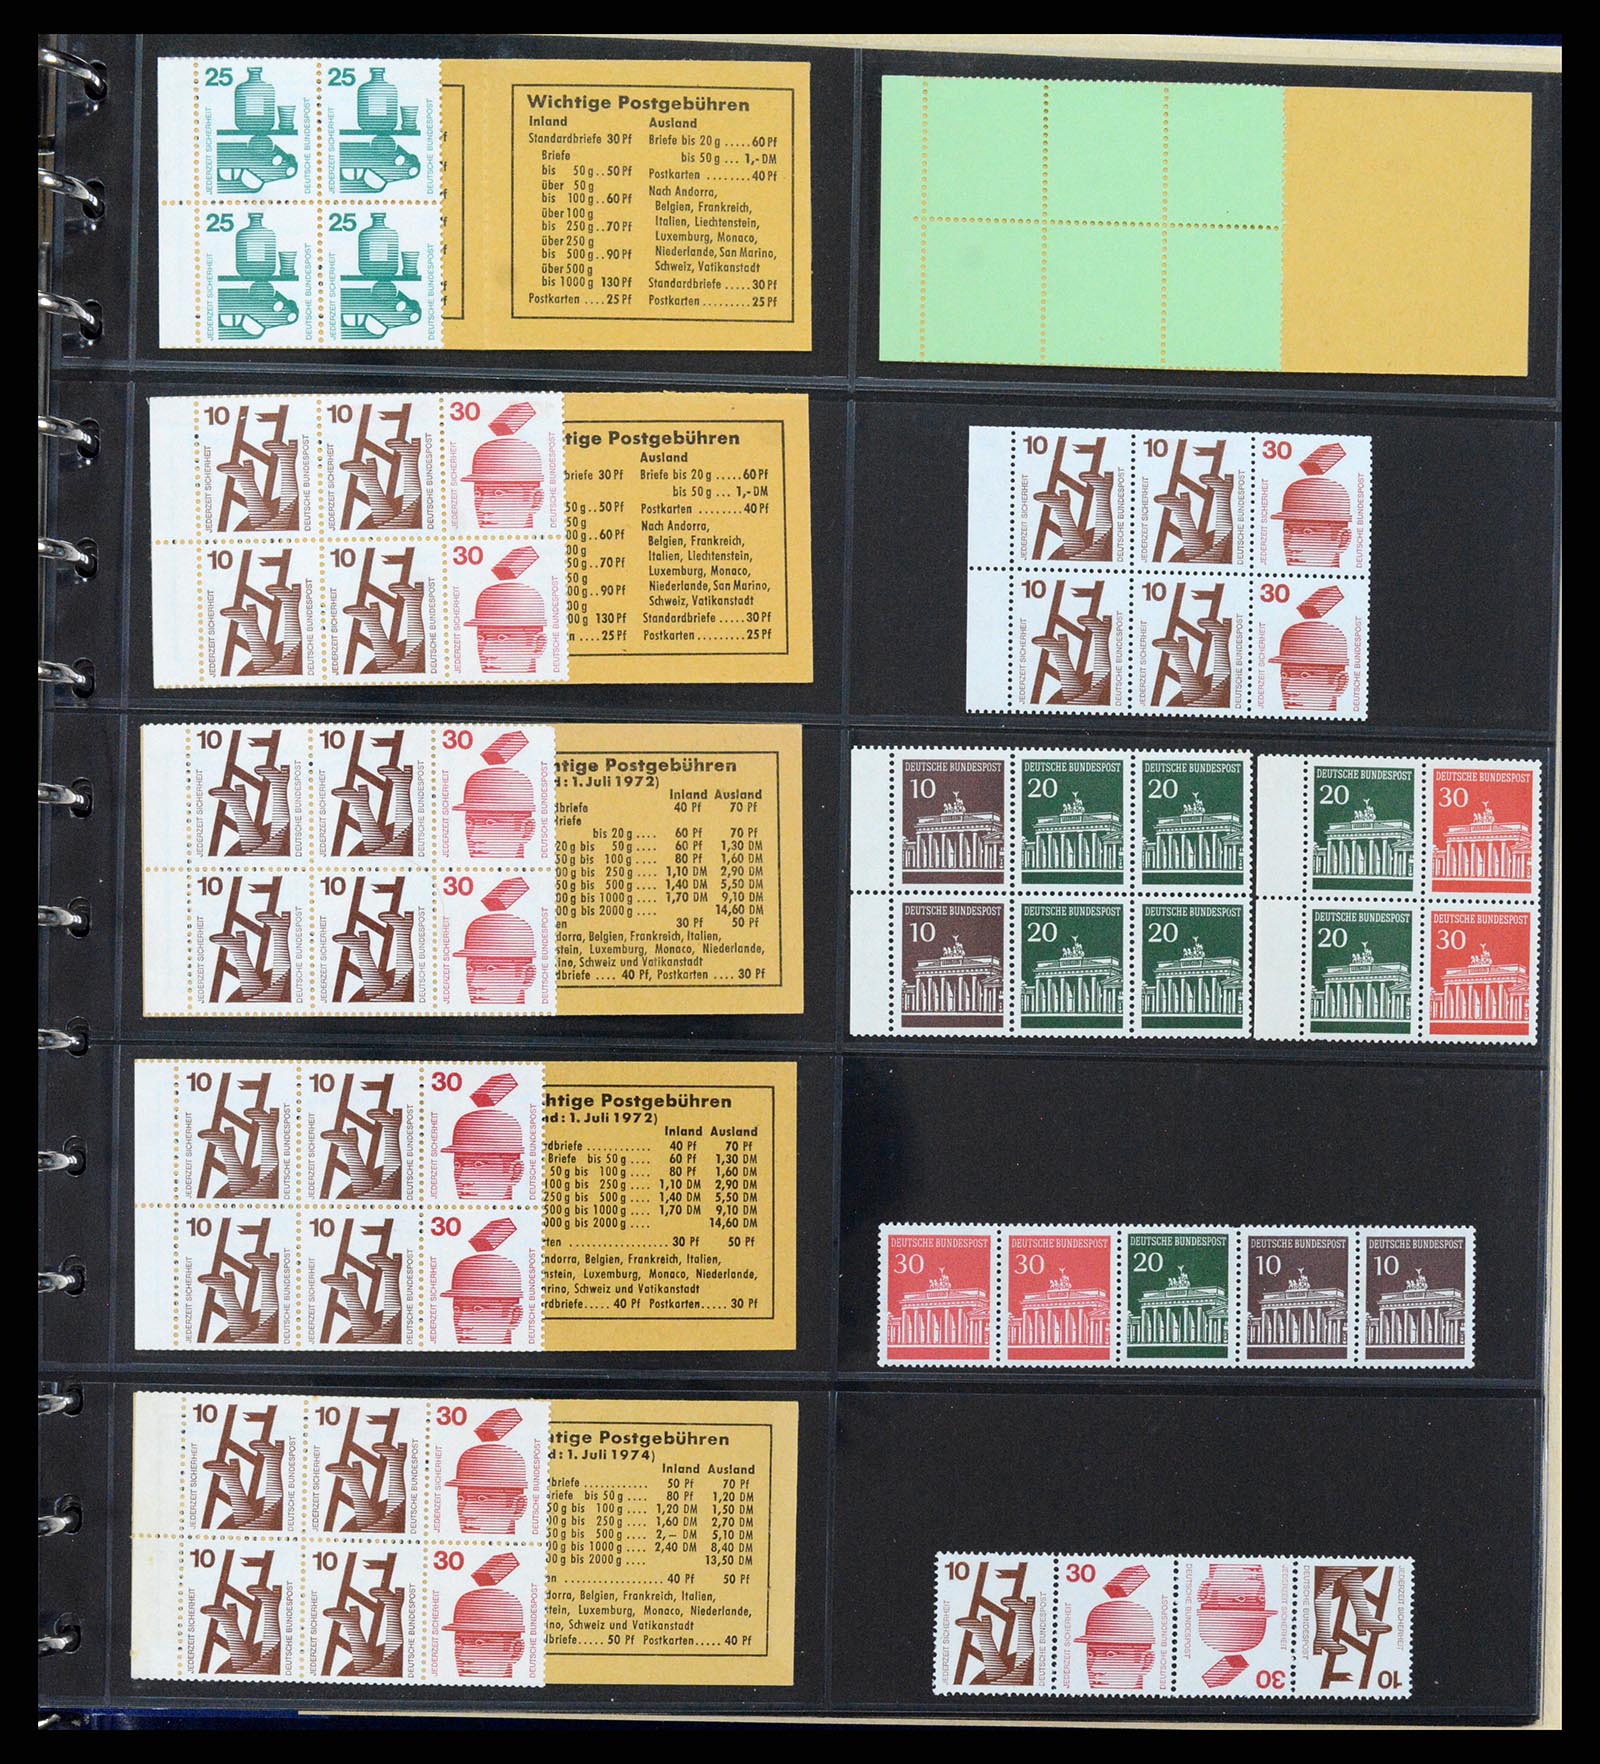 37365 017 - Stamp collection 37365 Bundespost stamp booklets 1951-2001.